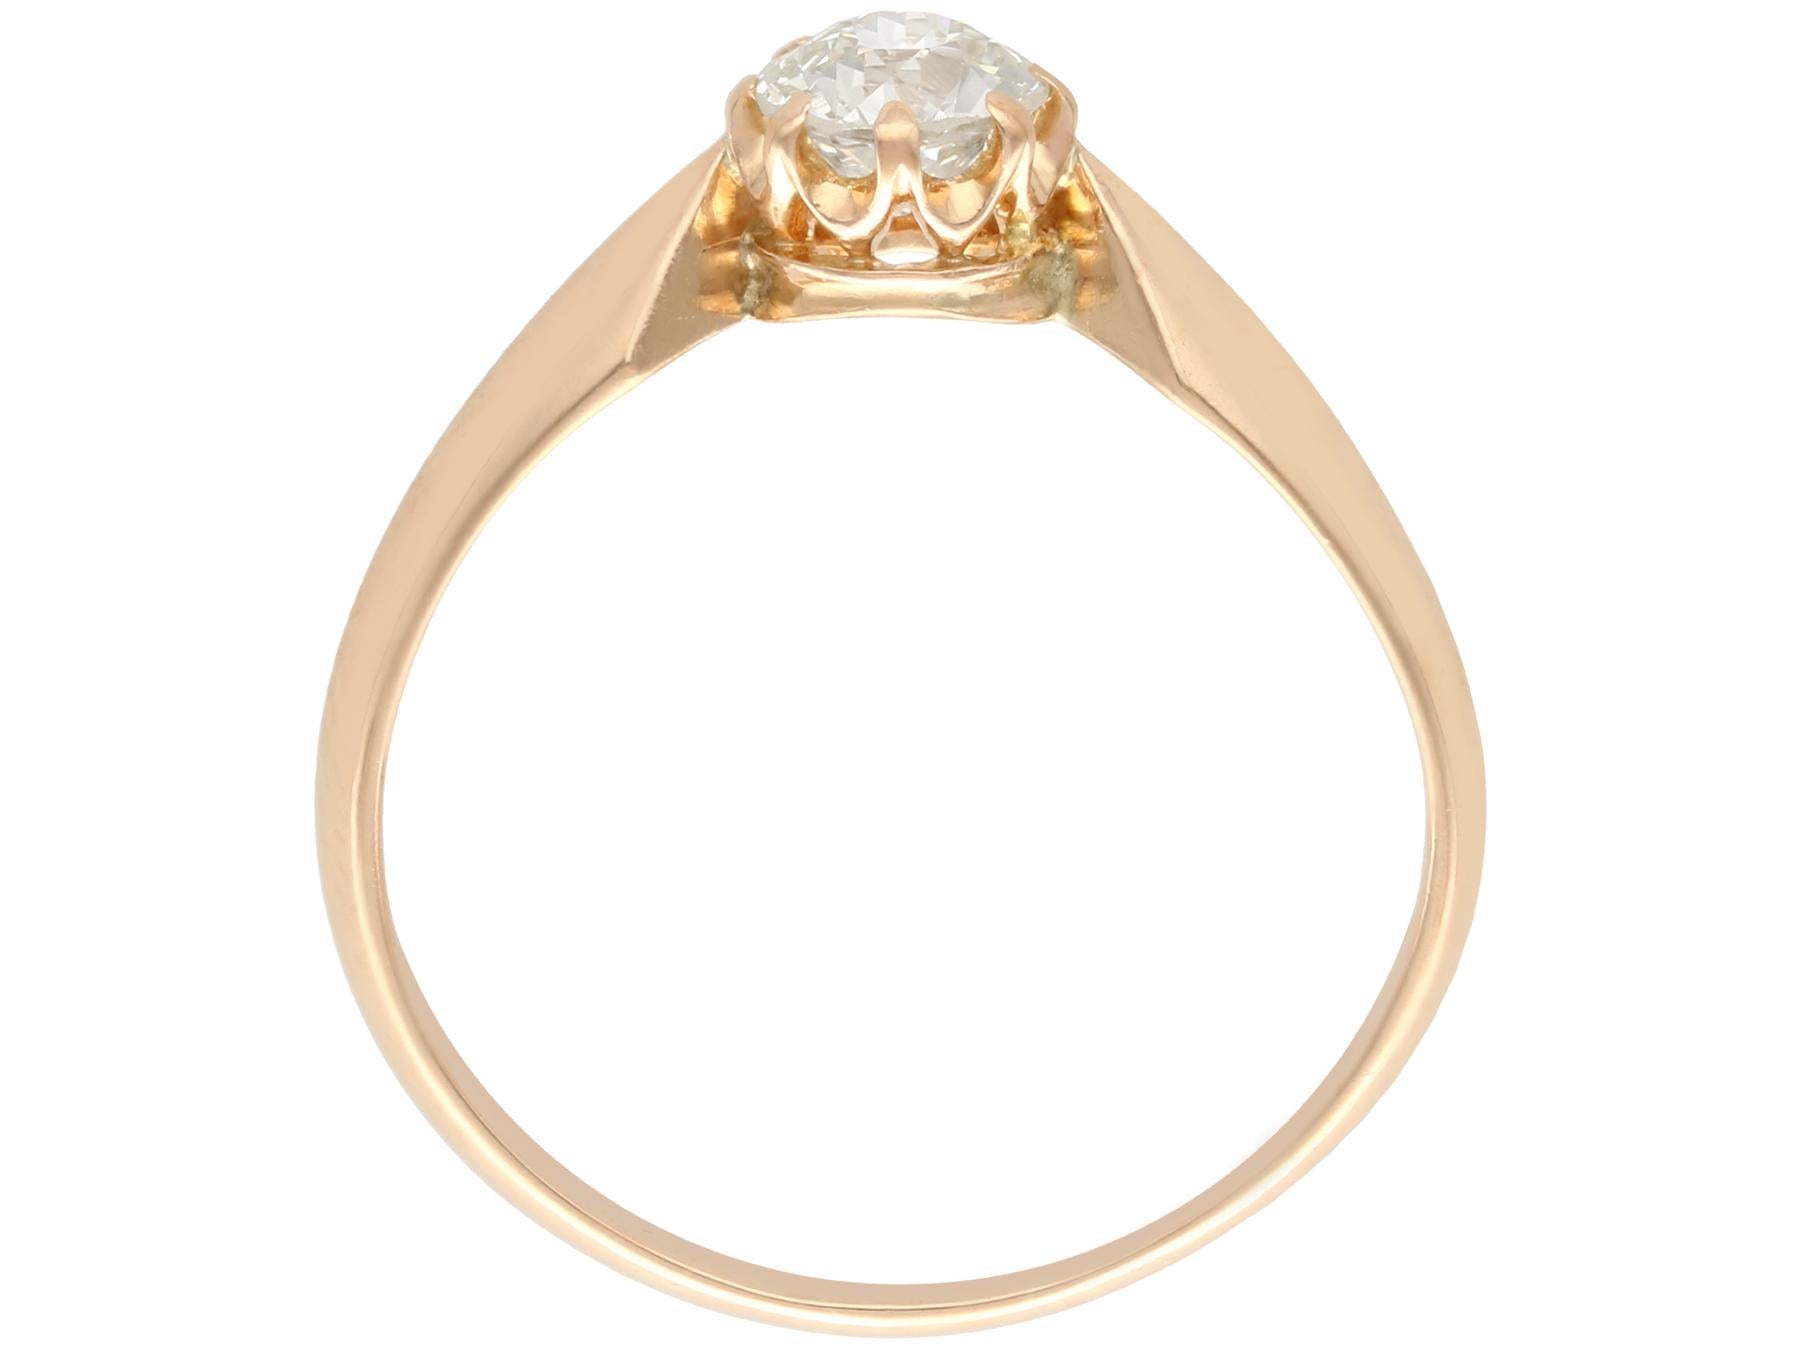 Antique 1910s Diamond and Rose Gold Solitaire Engagement Ring In Excellent Condition For Sale In Jesmond, Newcastle Upon Tyne